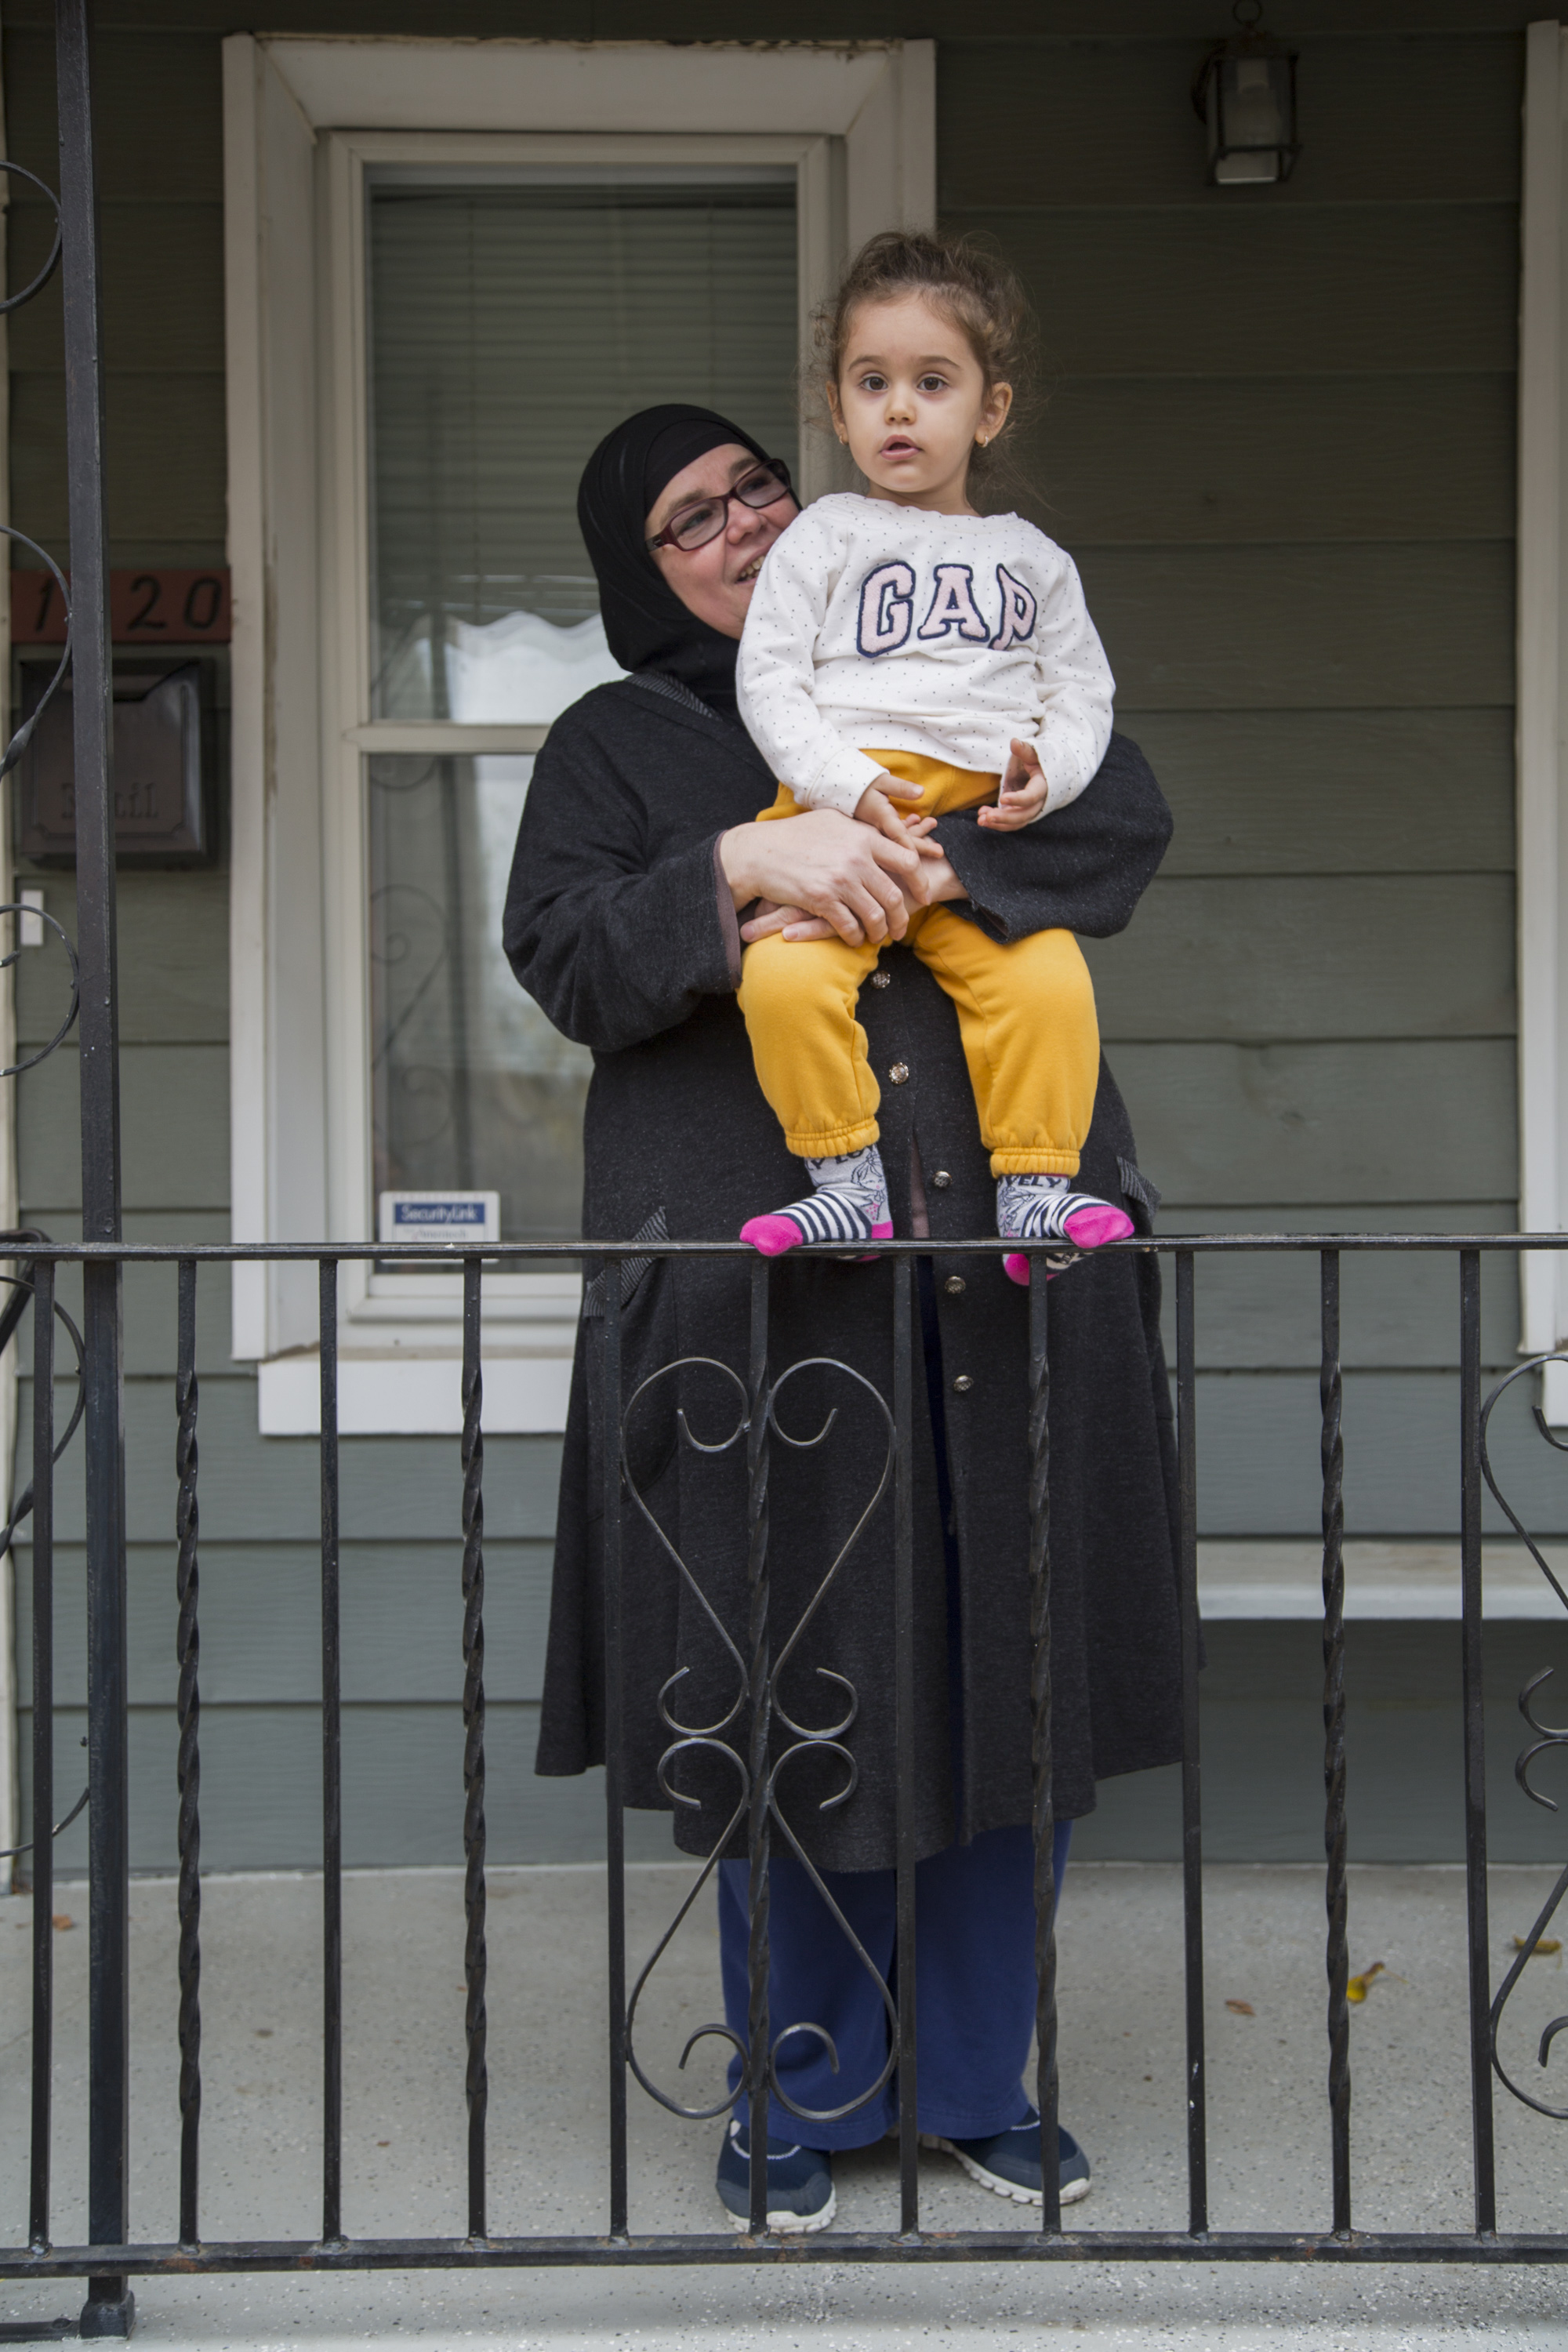 Sirma Celep, left, holds her granddaughter, Armina, on the front porch in November 2015. The duo was photographed for the Philly Block Project in November 2015, a collaboration between the Philadelphia Photo Arts Center and Hank Willis Thomas. Photo by Wyatt Gallery/Hank Willis Thomas Studio. 